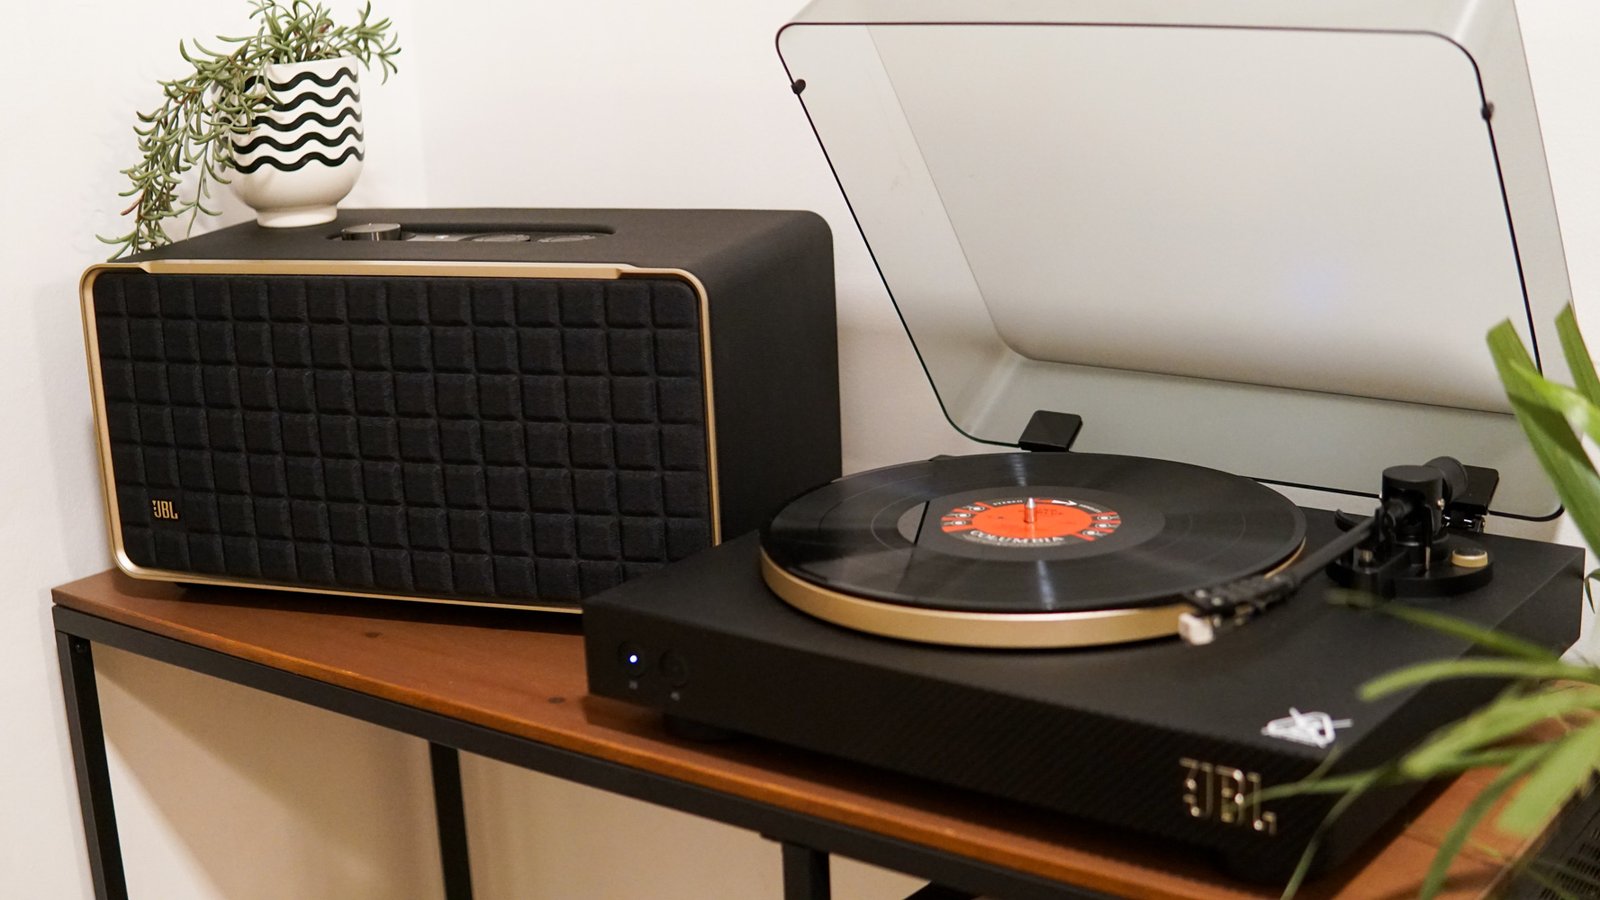 Vinyl Record Fan Youll Want This Gorgeous Speaker and Turntable Combo From JBL